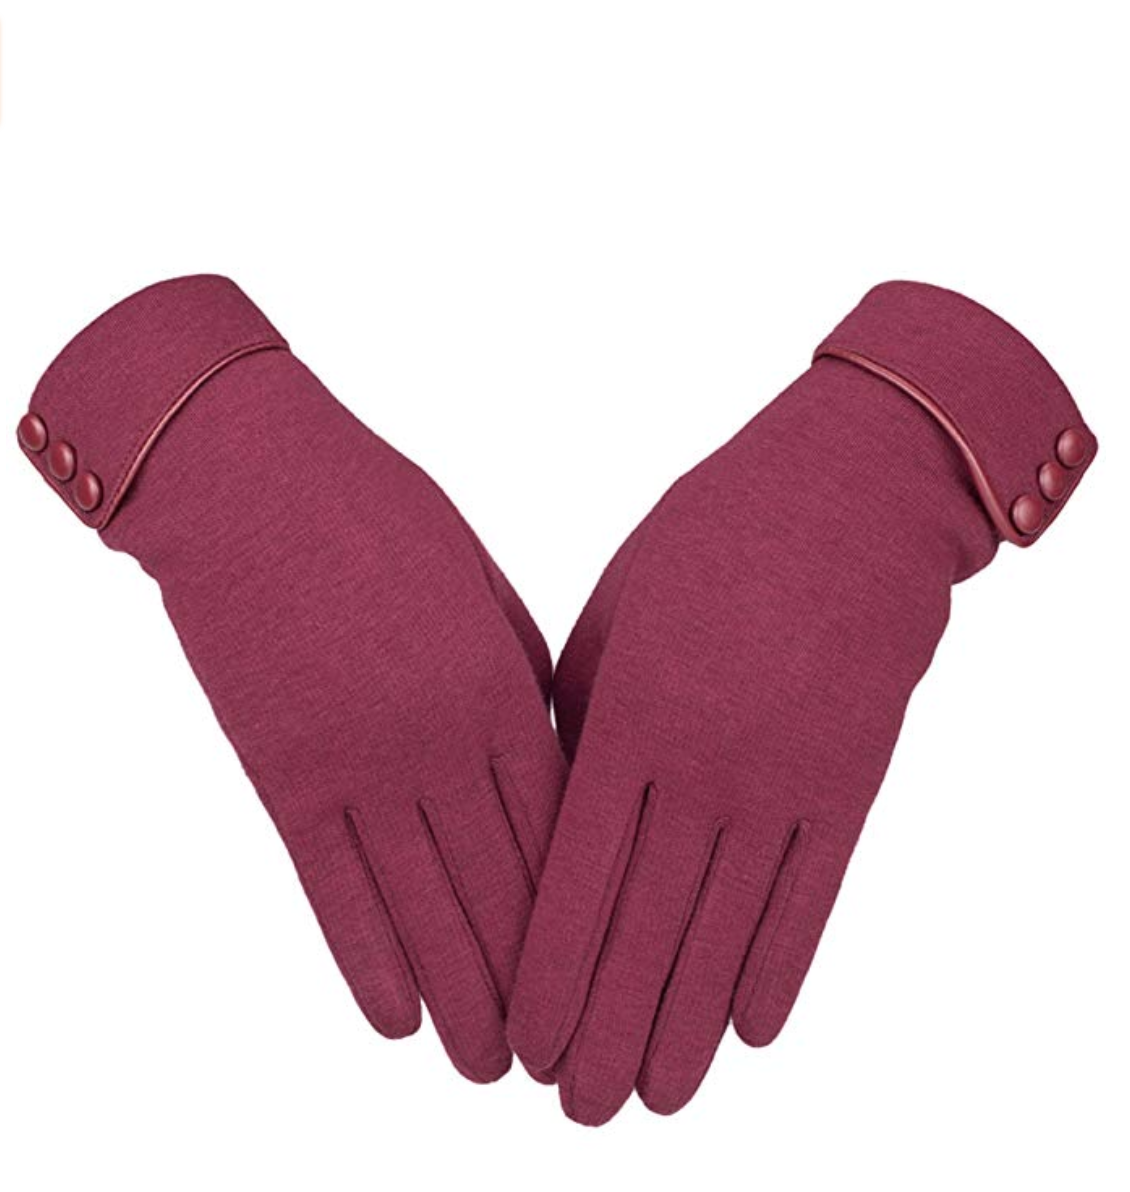 Womens Ladies Leather Gloves With Bow Design Warm Winter Fleece Lined All Size M L XL Christmas Gift